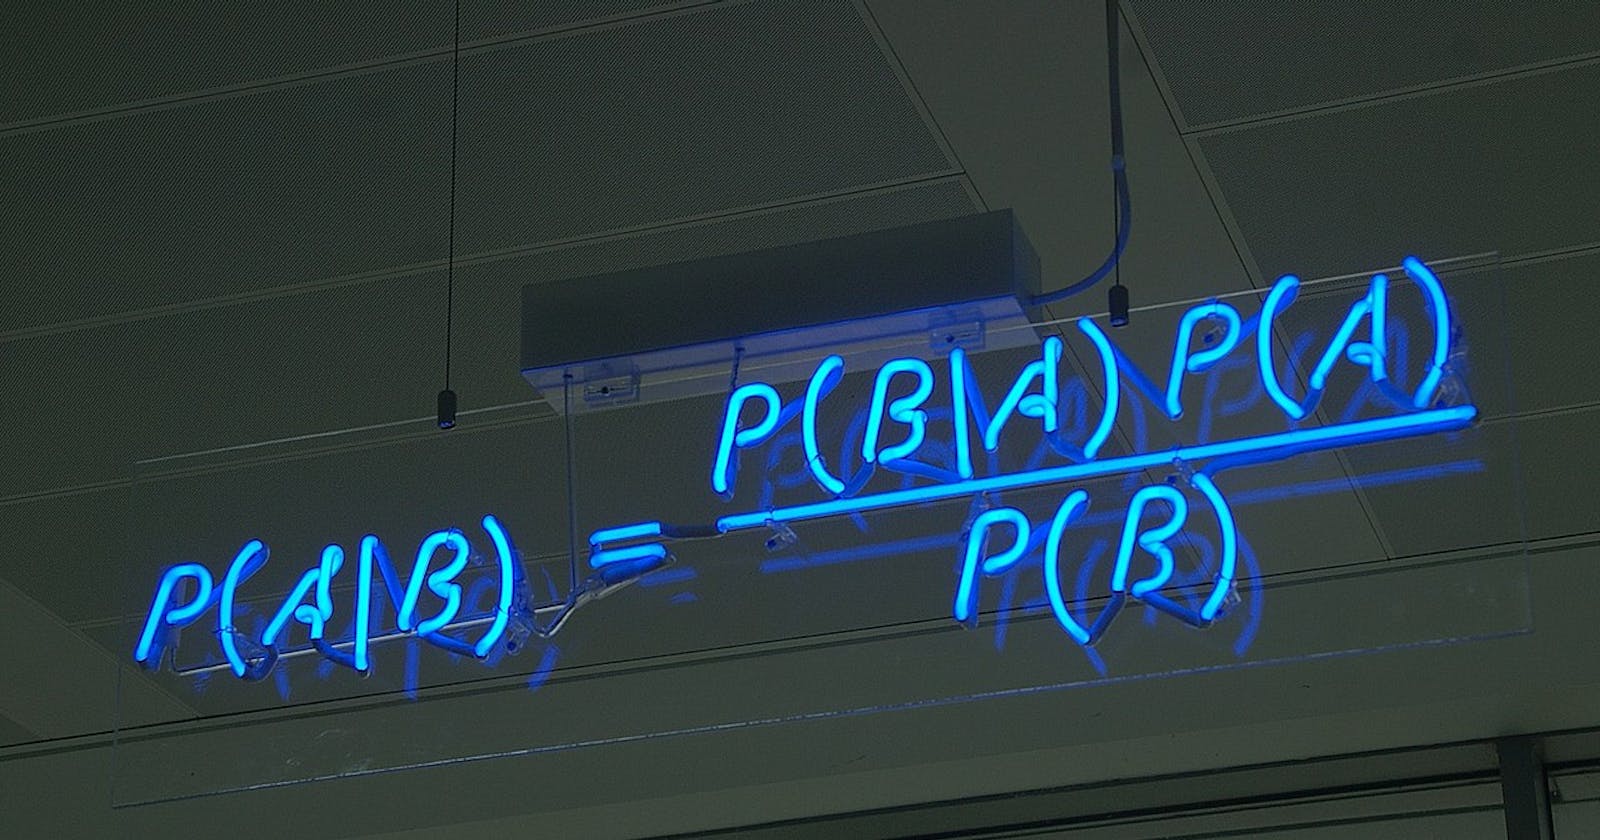 Understanding Bayes theorem in plain English